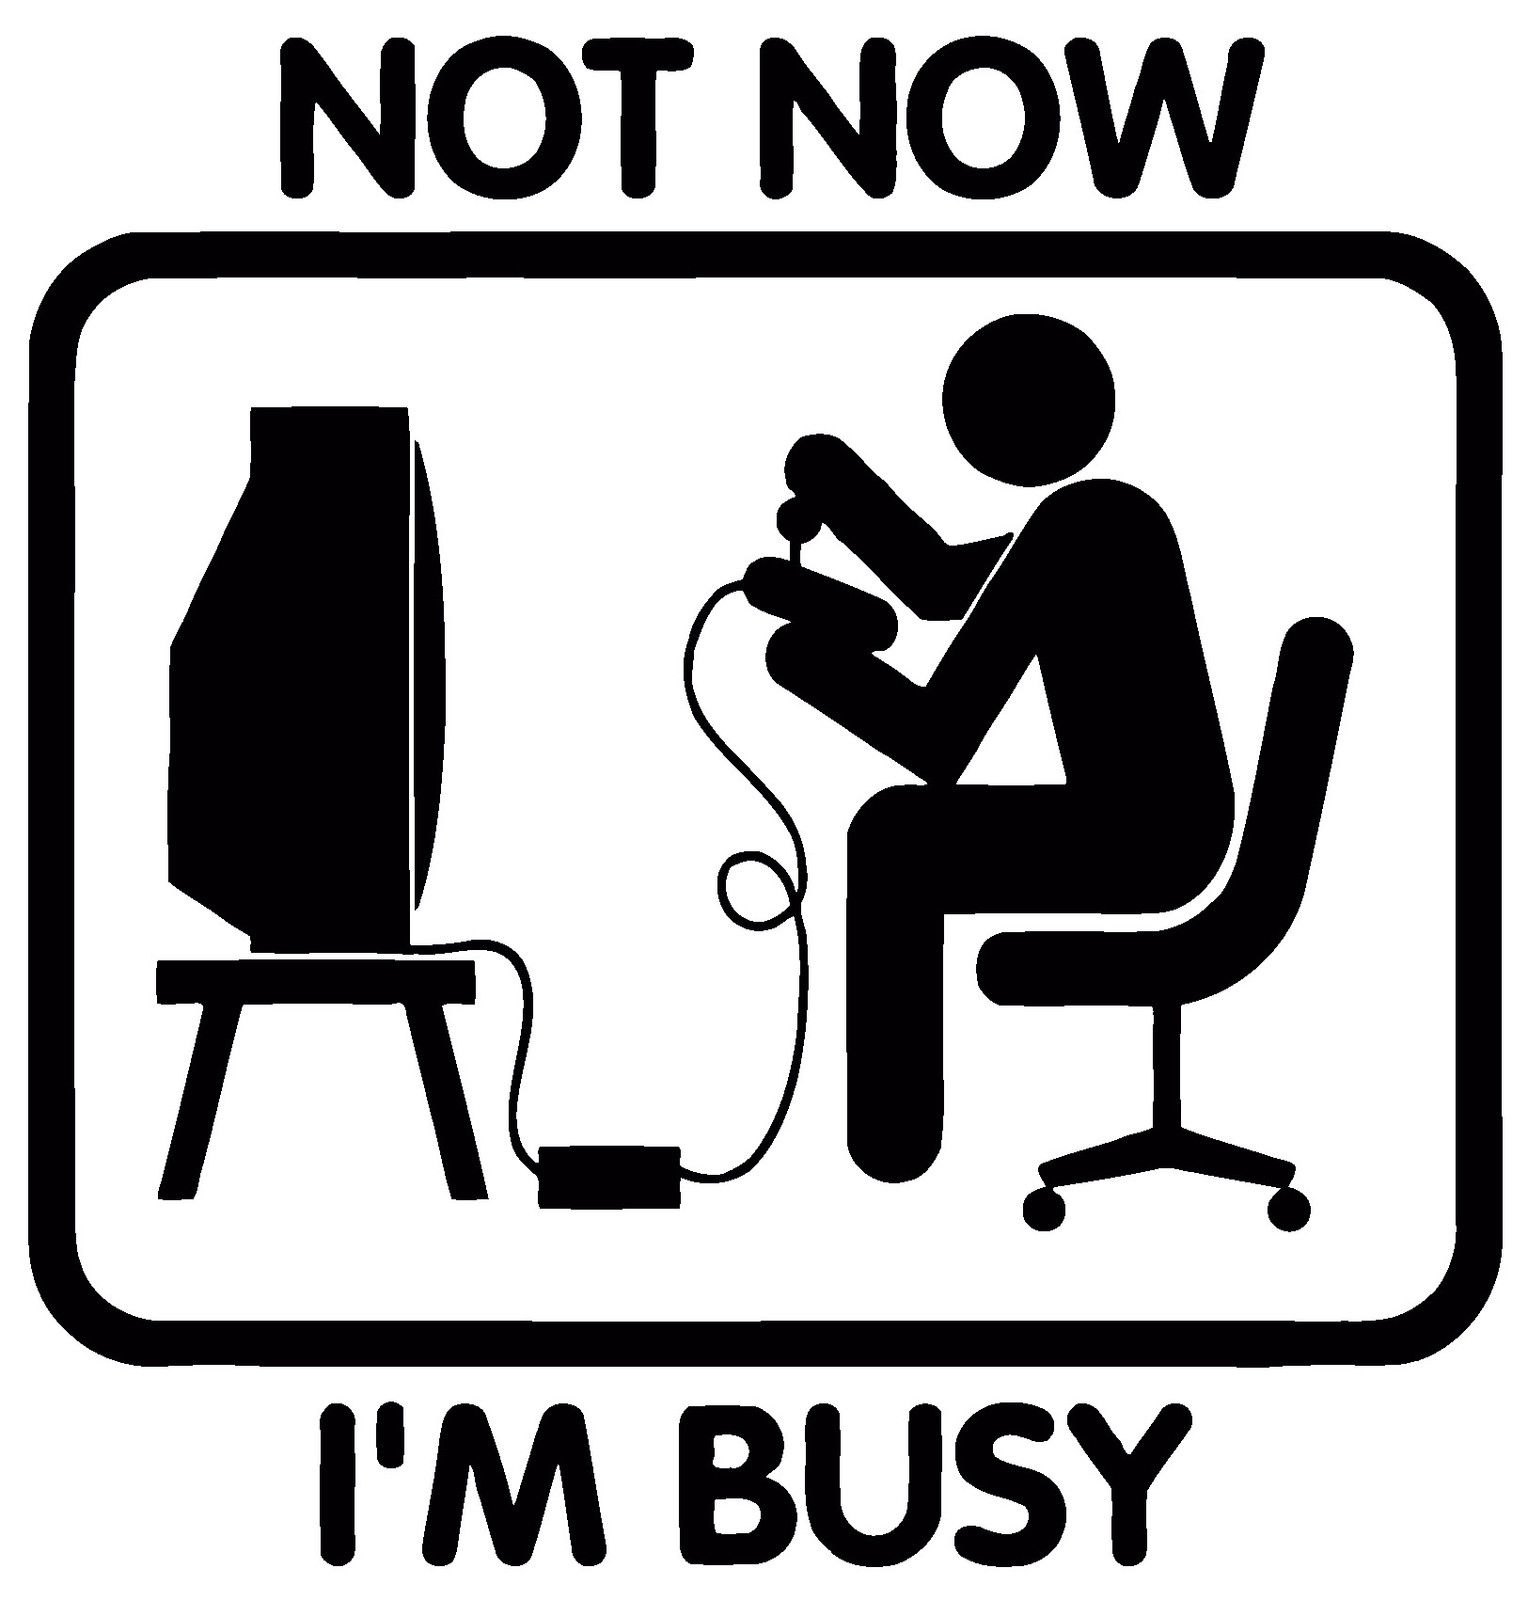 G004 Not Now I'm Busy Gamer Games Xbox PS Console Bedroom Decal Wall ...